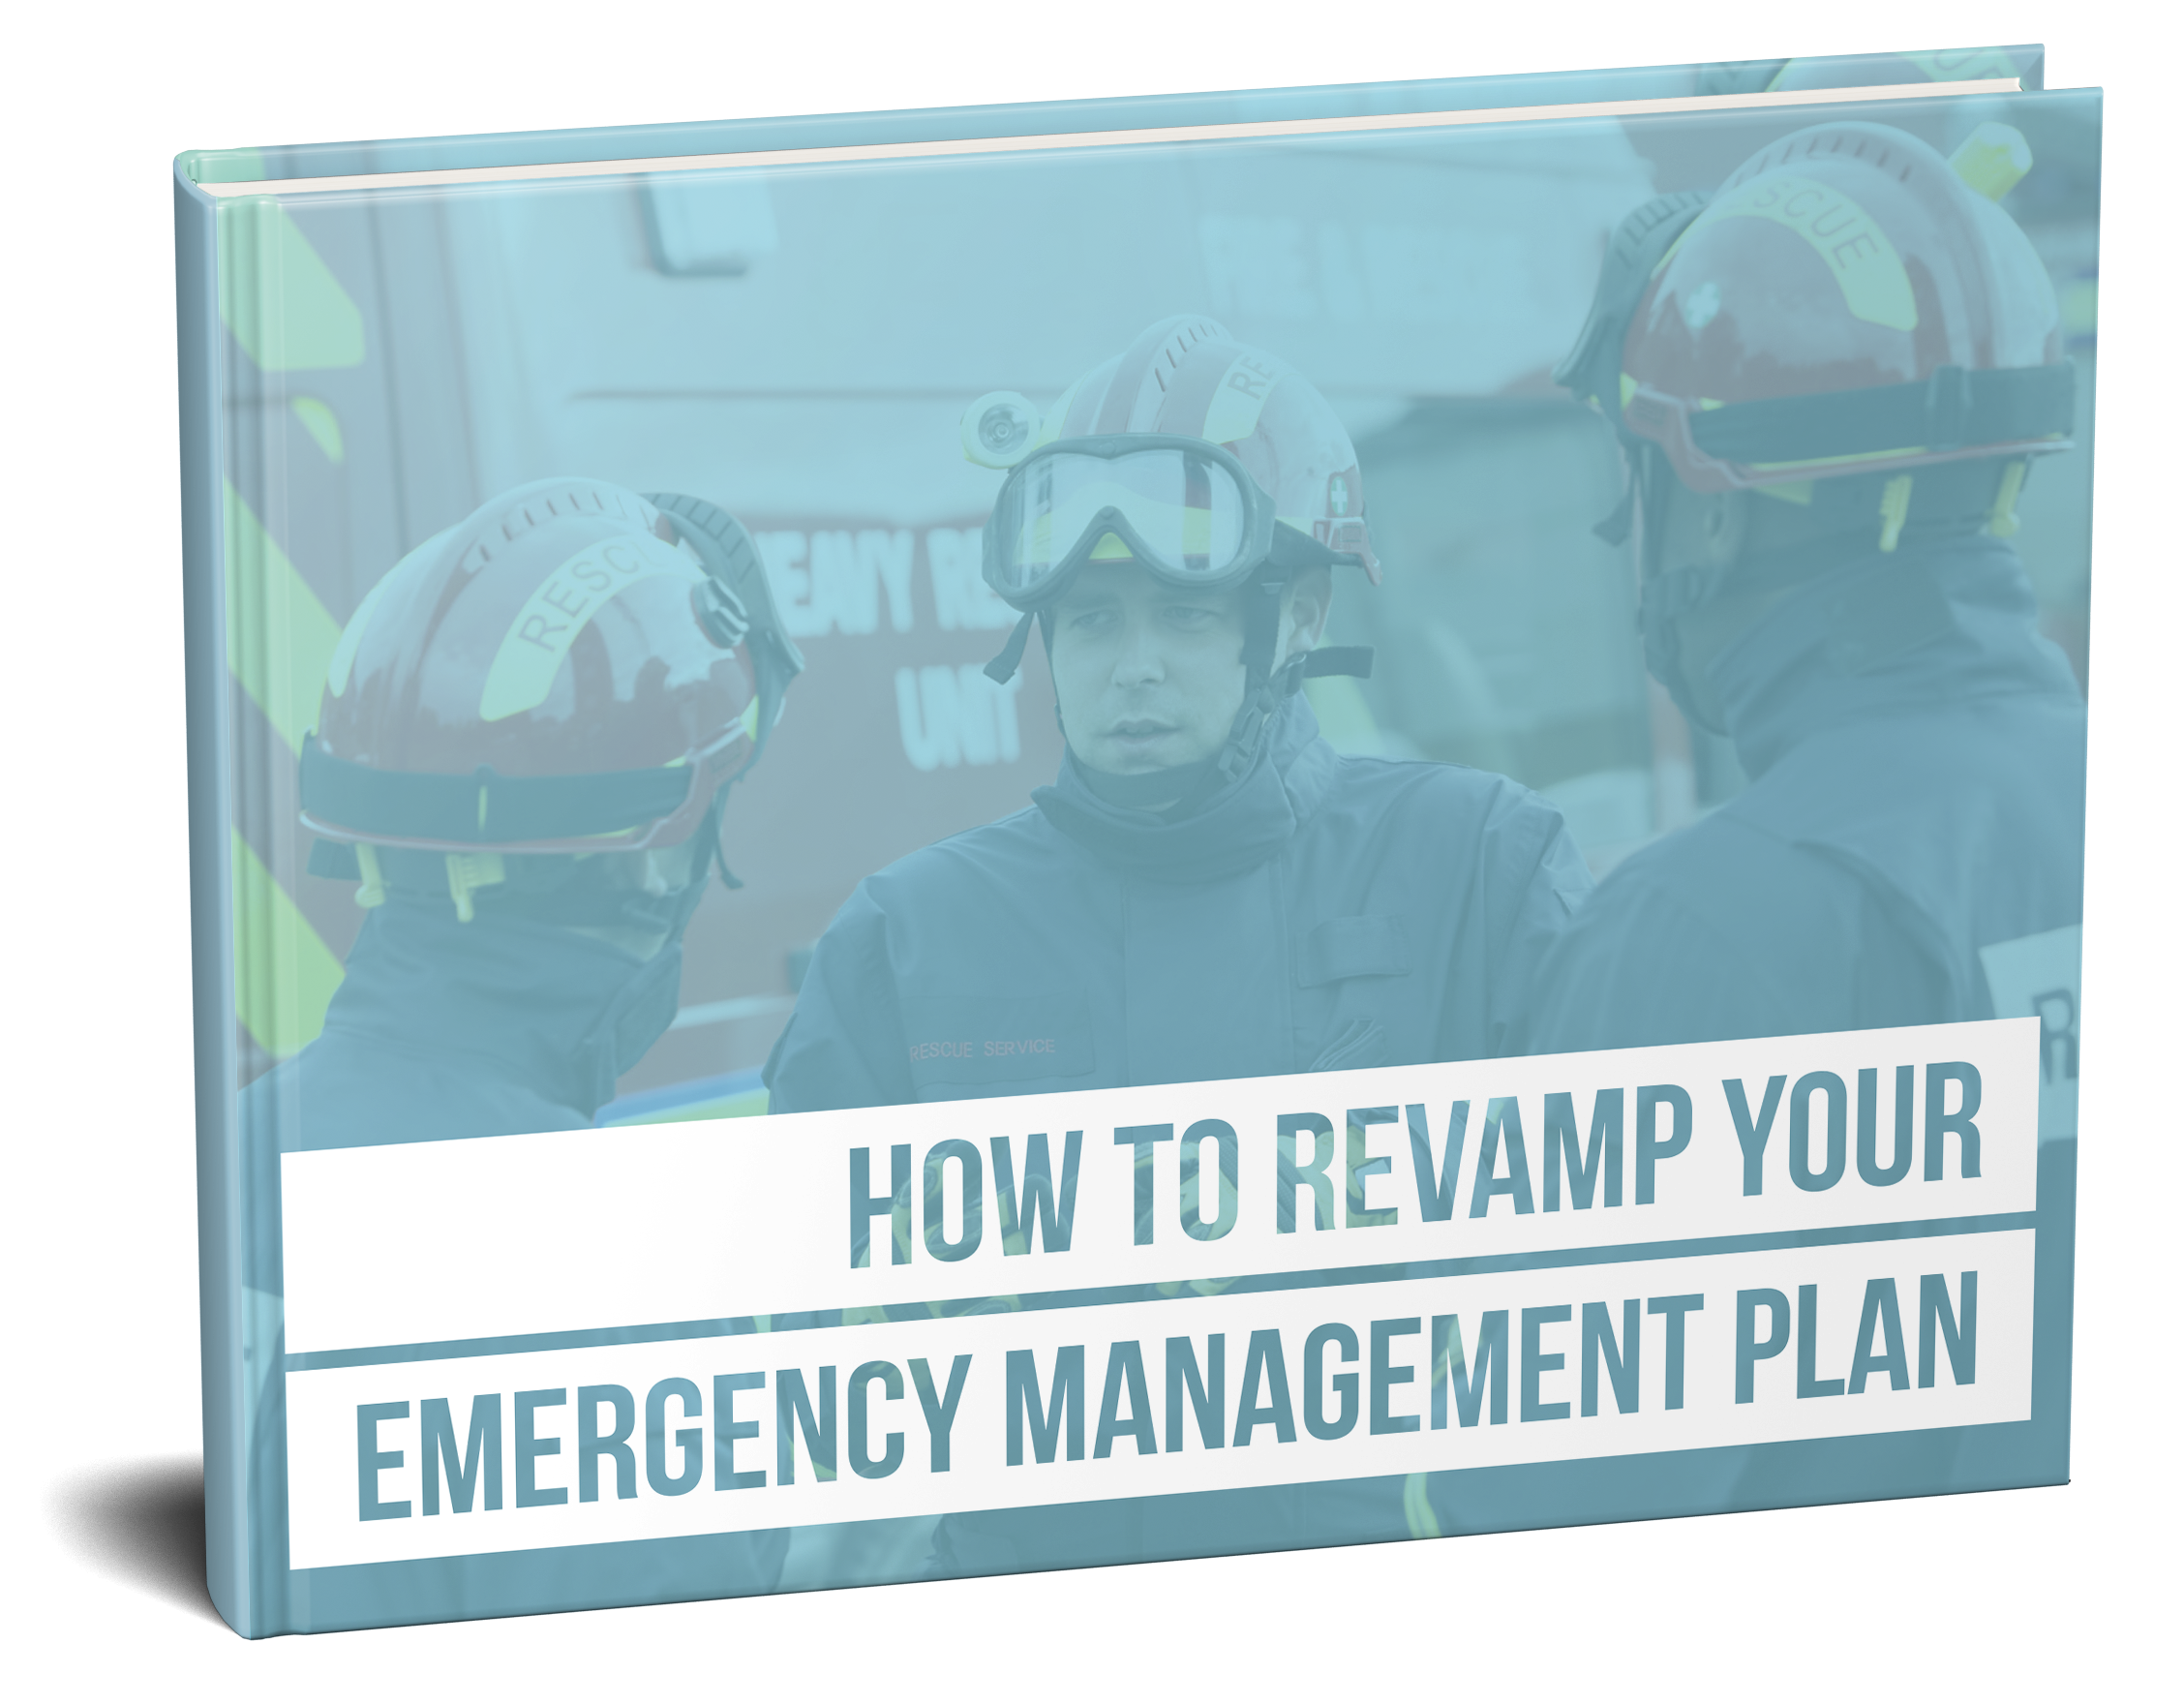 How to Revamp Your Emergency Management Plan